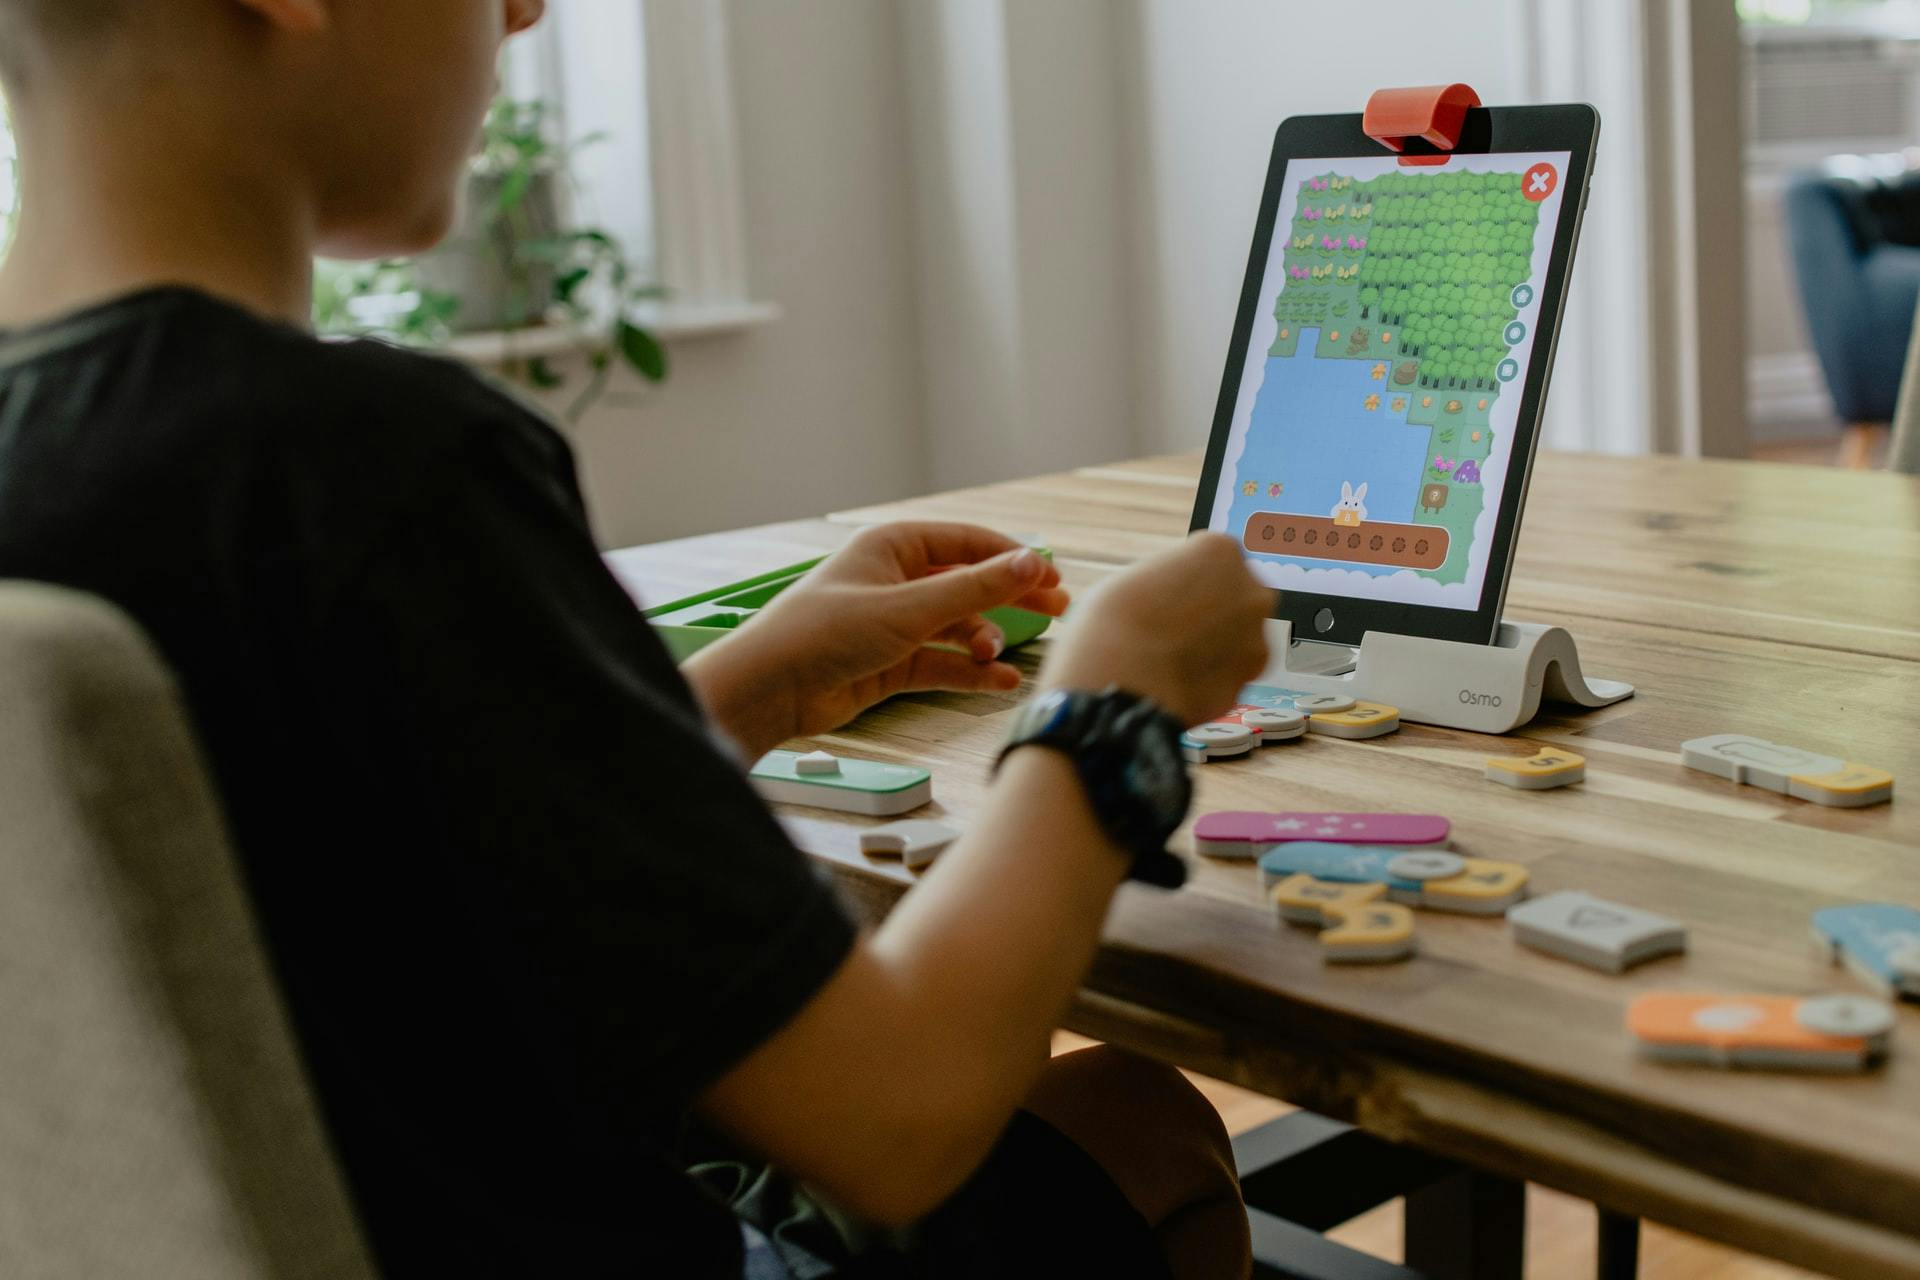 Young boy plays with an online learning game on a tablet while sitting at a kitchen table.